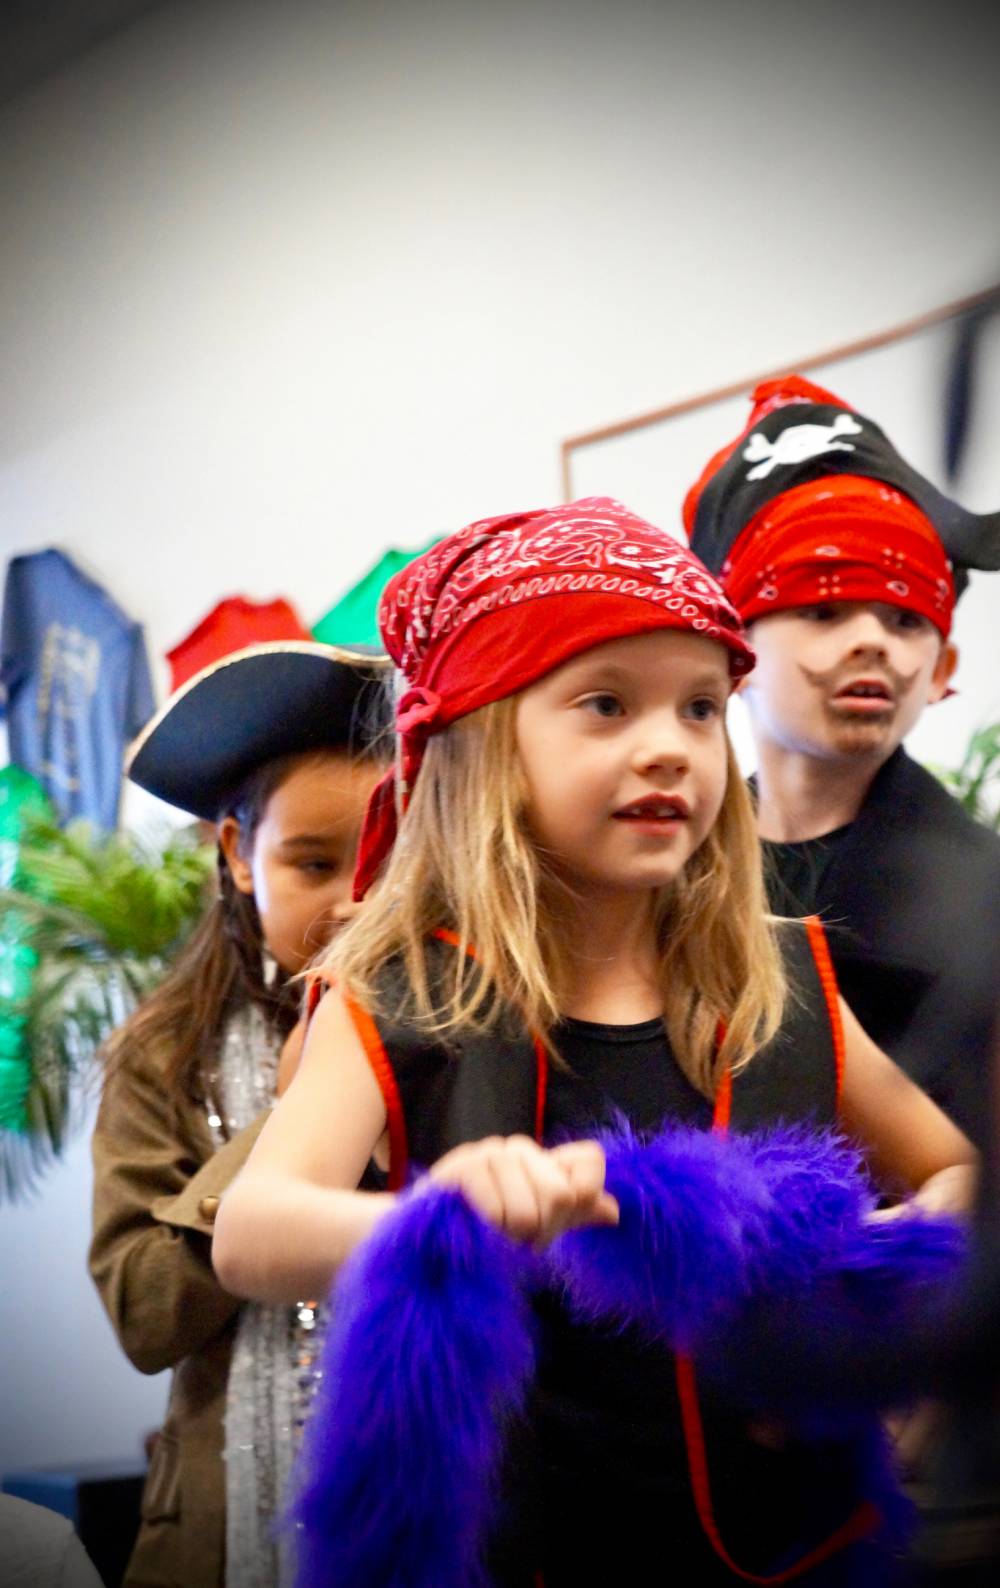 TOP ARIZONA ART CAMP: Imagination Theatre Camp is a Top Art Summer Camp located in Mesa Arizona offering many fun and enriching Art and other camp programs. 